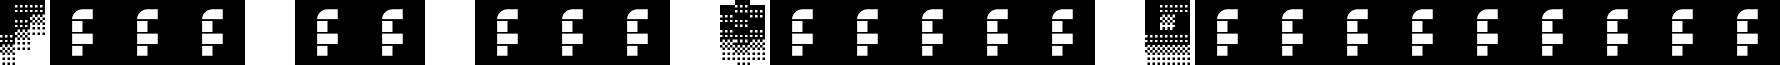 Fade of the Second Generation font - fade_of_the_second_generation.ttf